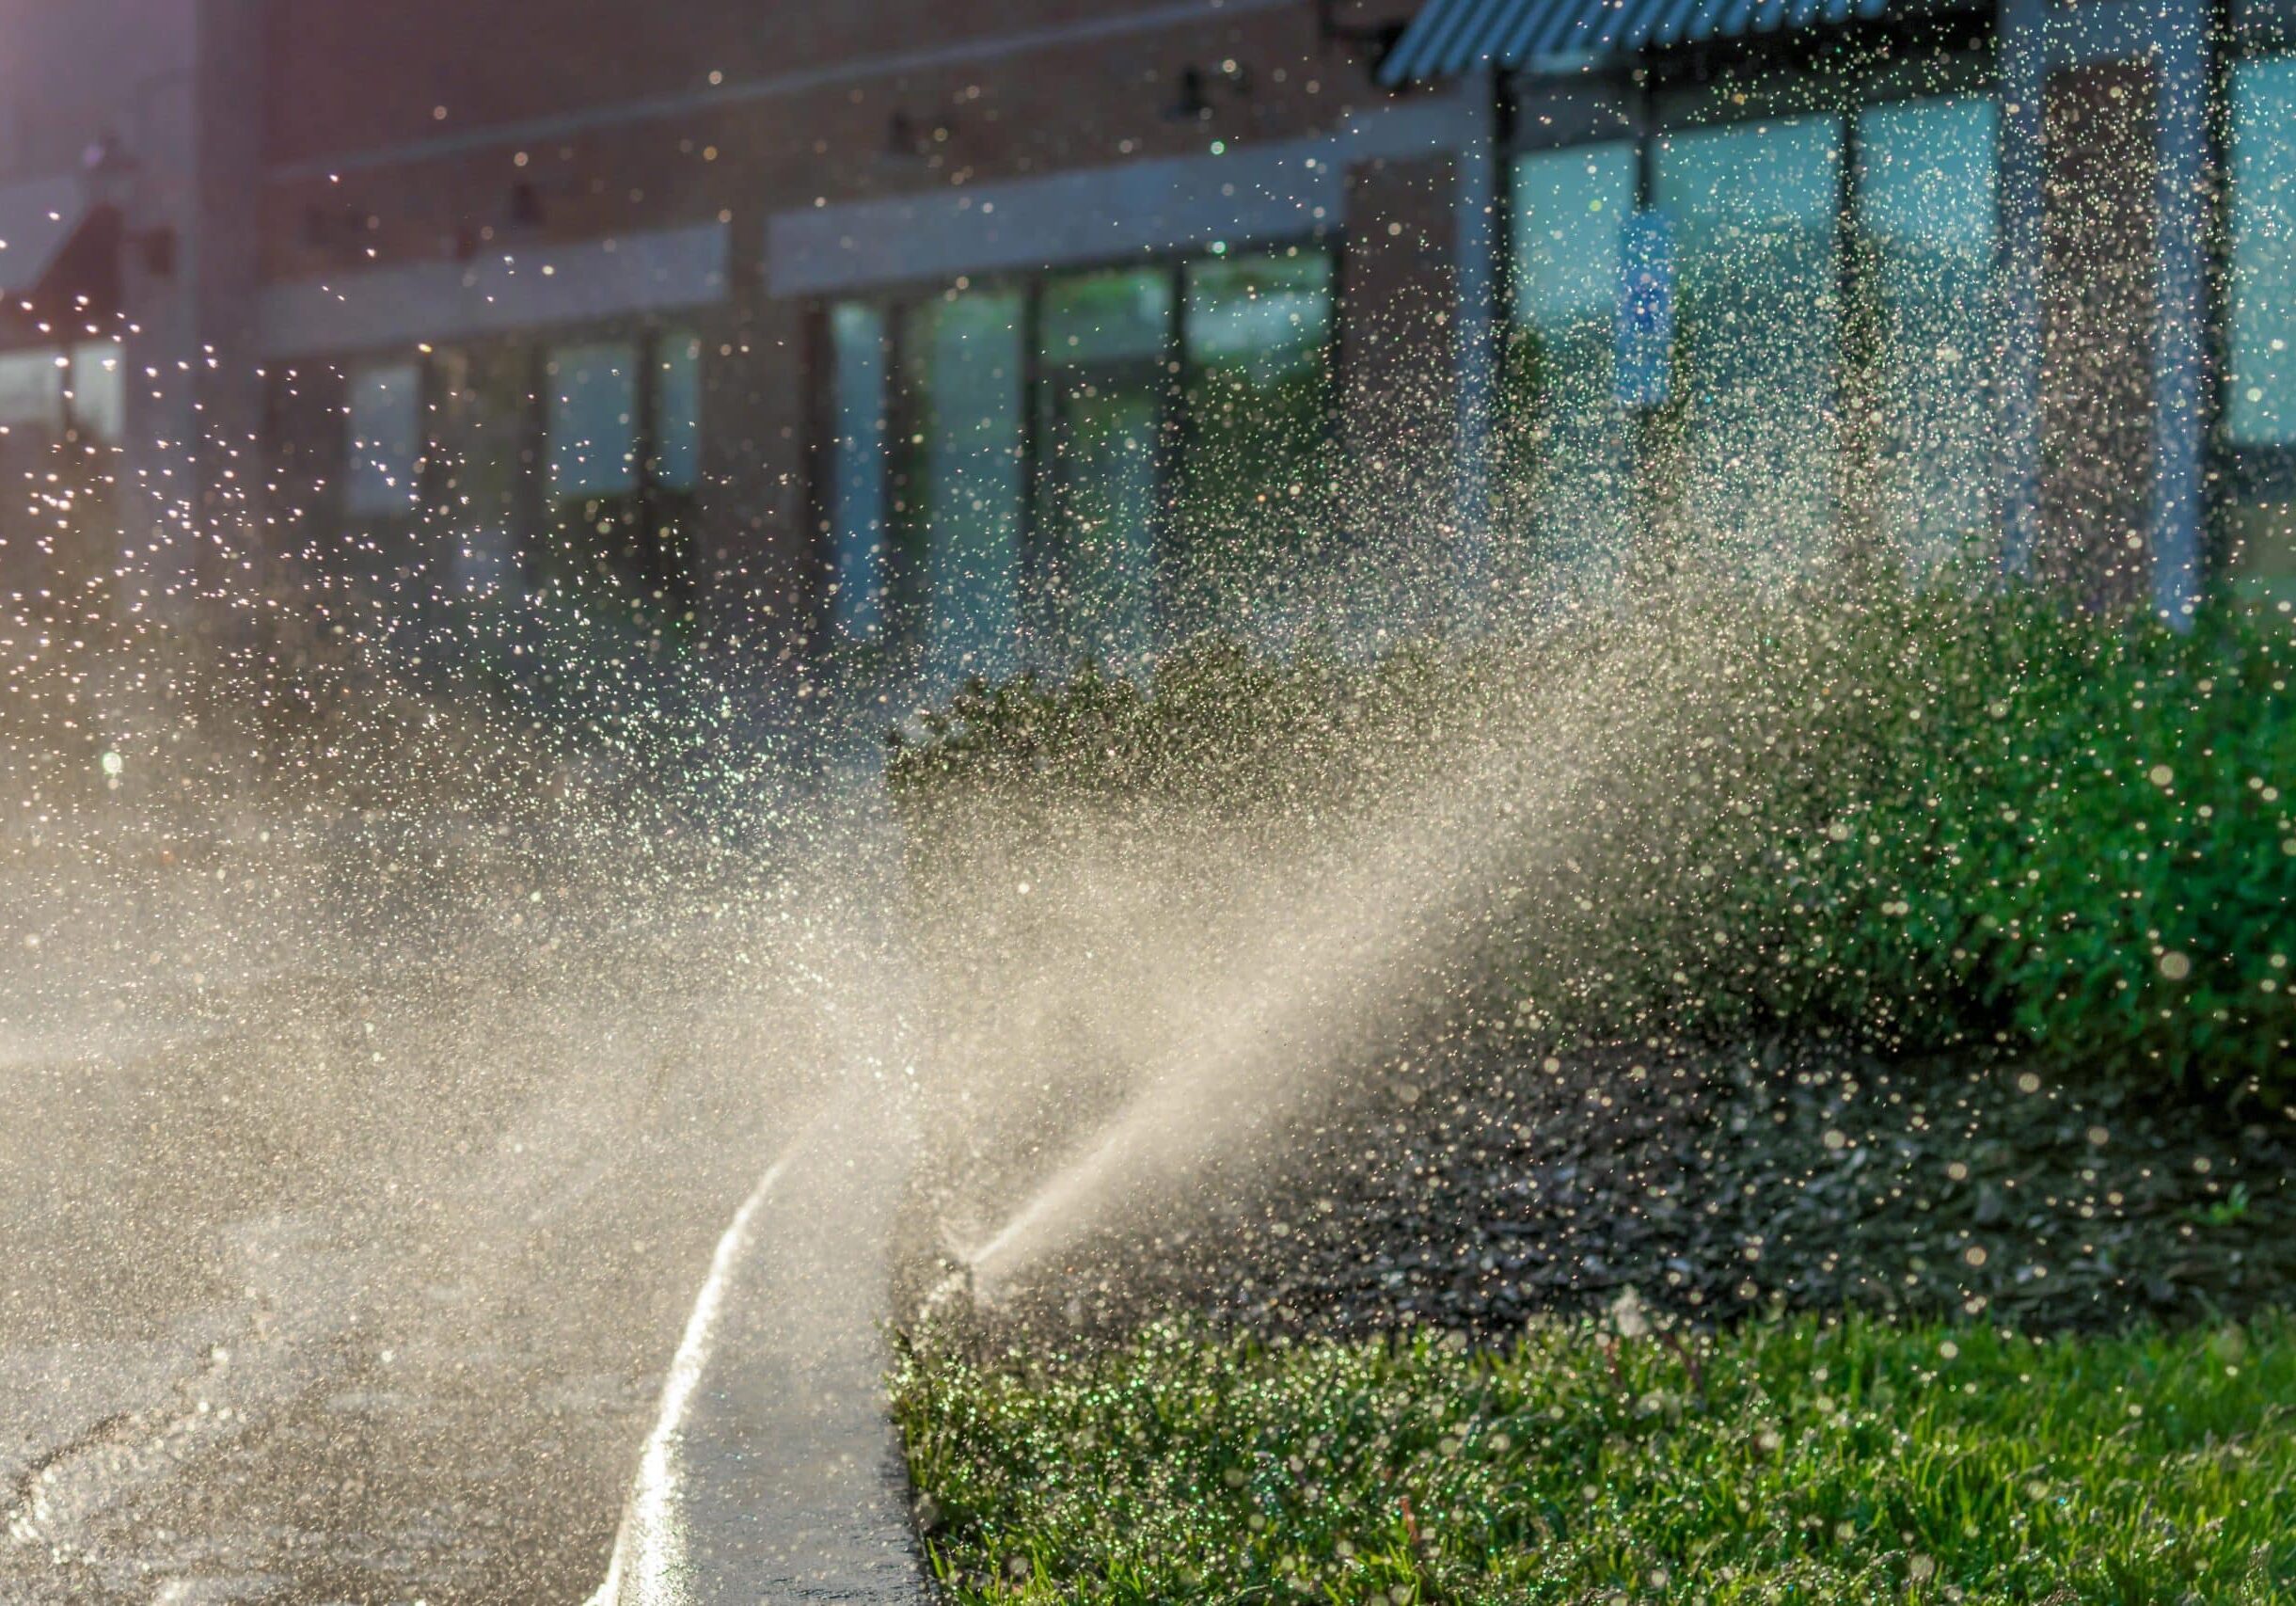 The surrounding landscape of your commercial buildings requires constant care to appear its best. Specifically, you'll need commercial irrigation services handled by specialist with the right tools and expertise to oversee large-scale projects. An automated commercial irrigation system supplies the water that lawns and plants need to stay lush and green without the manual fuss of portable sprinklers and hoses. A dedicated name like Doctor Sprinkler currently services commercial systems in malls, churches, schools, HOA neighborhoods, entryways, common areas, country clubs, and athletic fields. We offer commercial irrigation services that will help enhance your building's curb appeal and leave a winning impression on visitors and occupants every time.